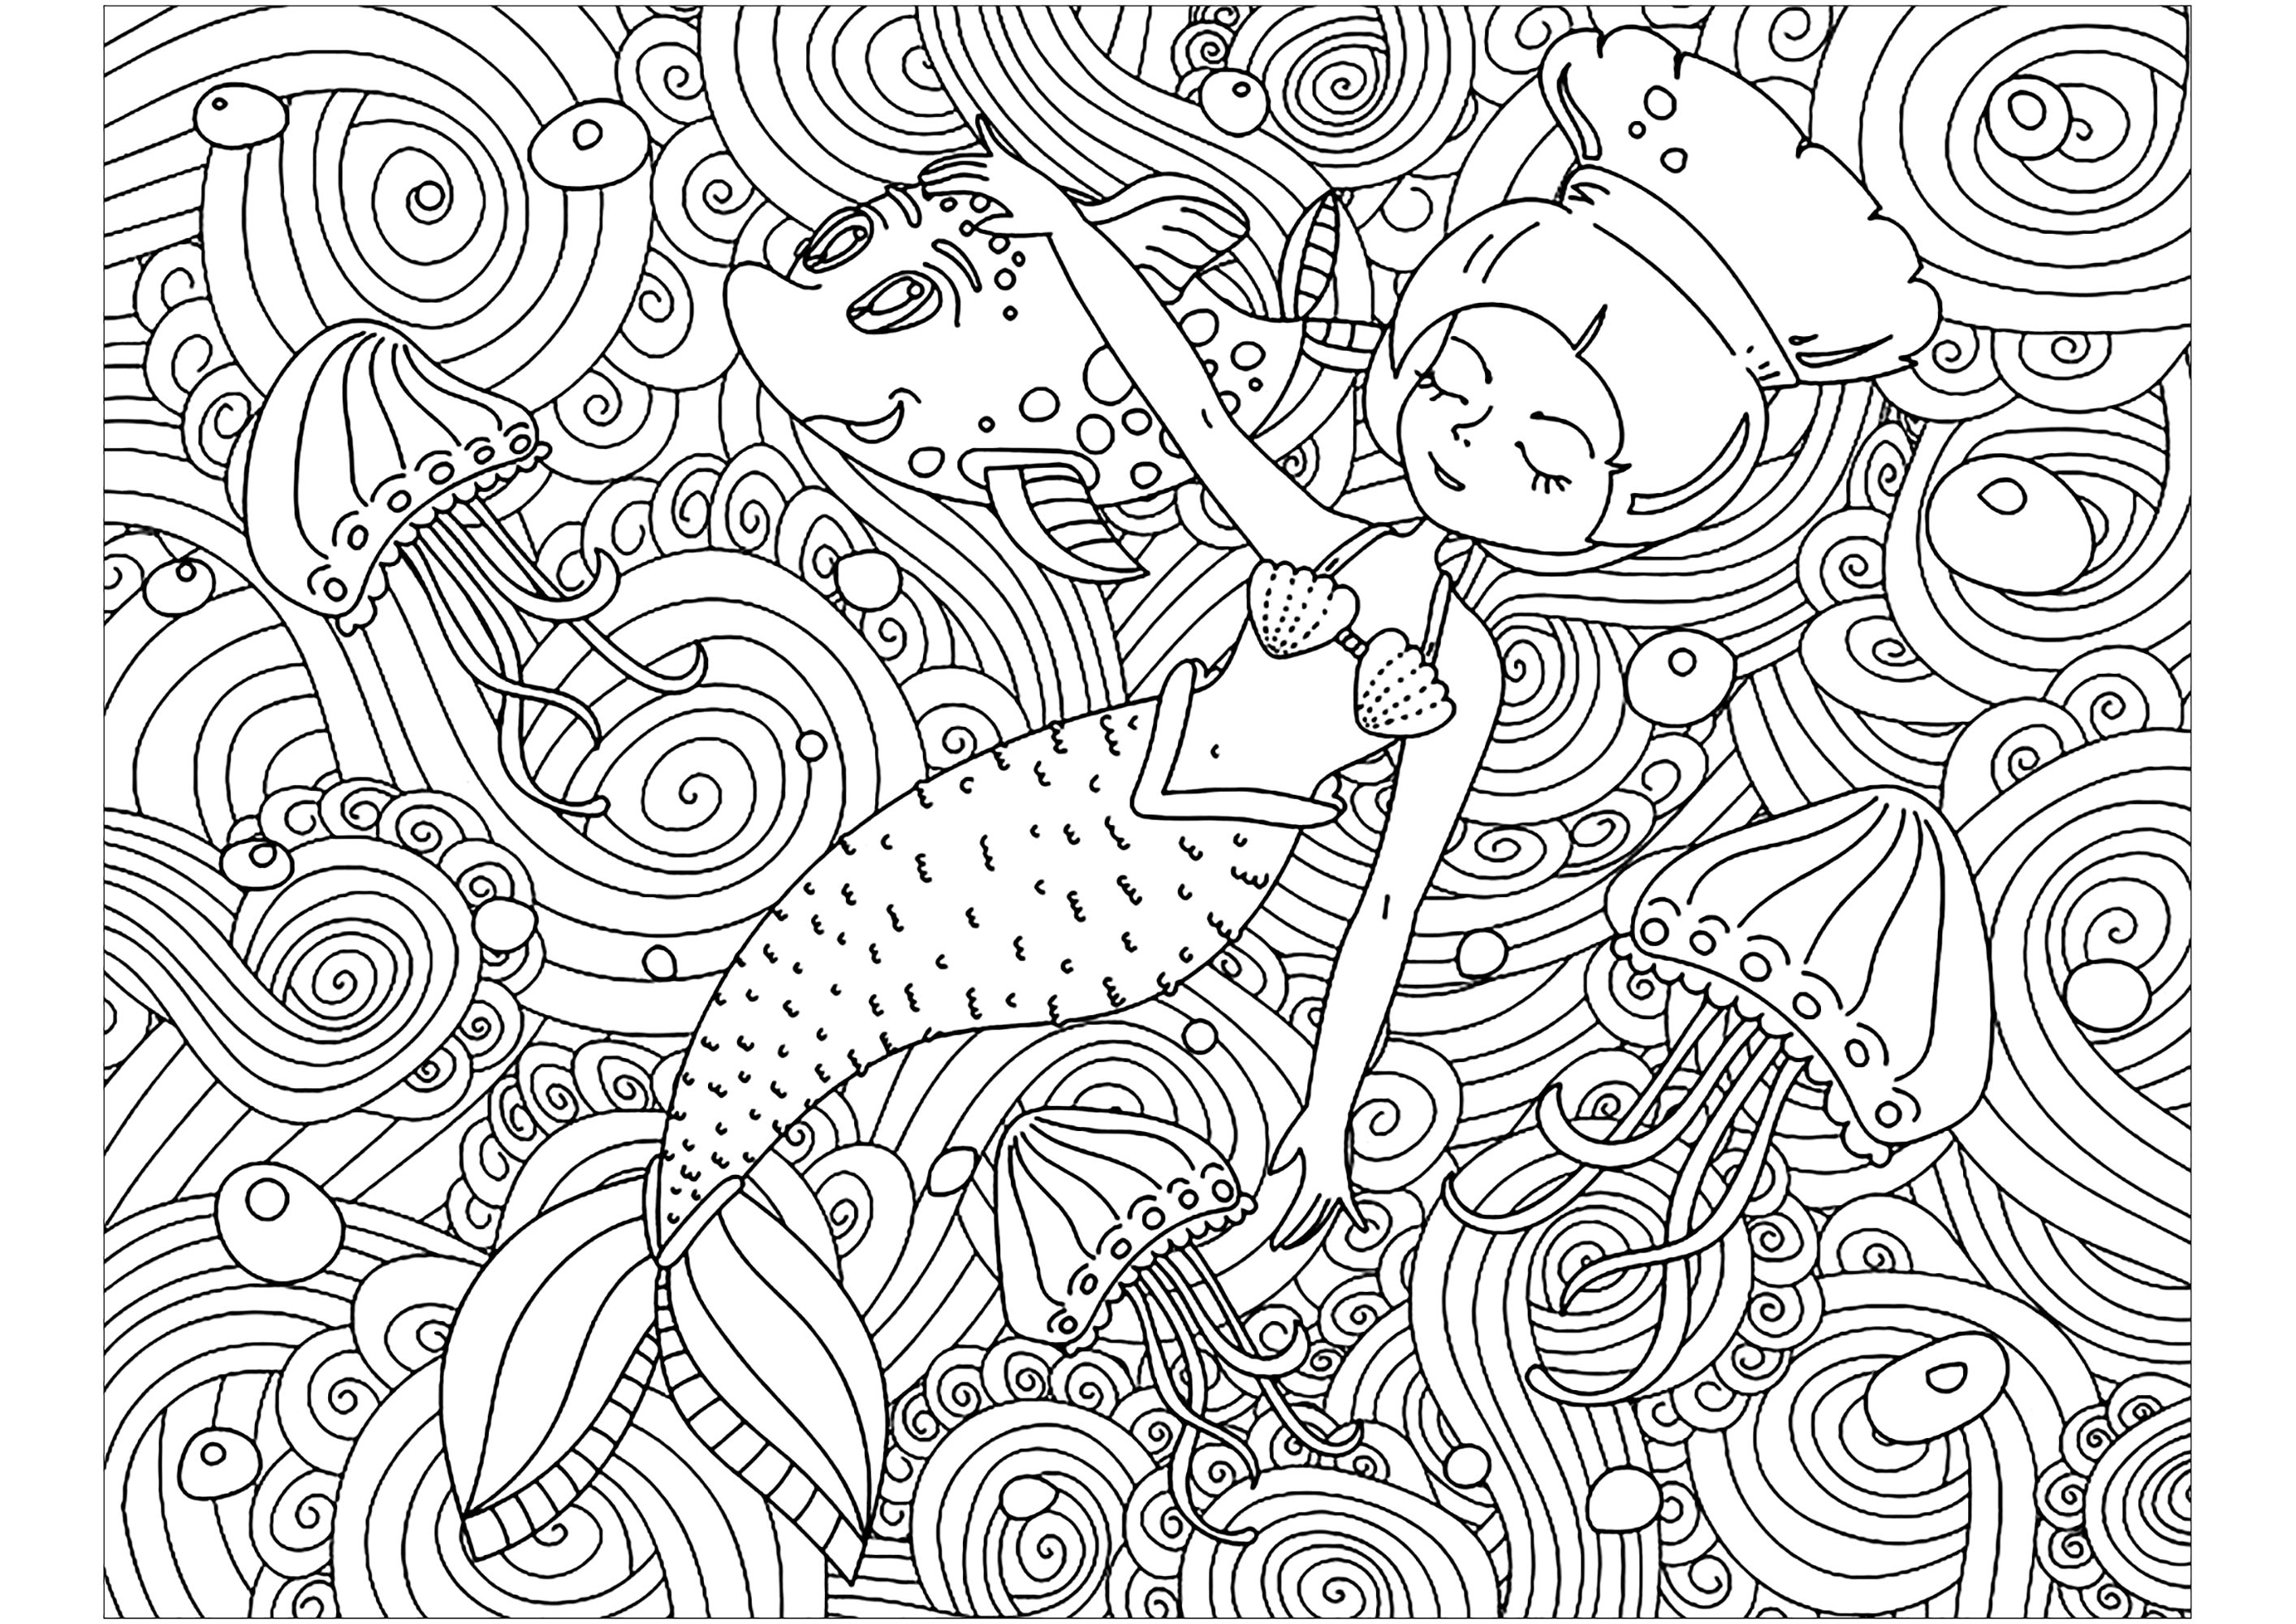 Mermaid and pretty patterns. Color this little mermaid sleeping peacefully in a sea full of beautiful, intricate patterns, Source : 123rf   Artist : Lexver